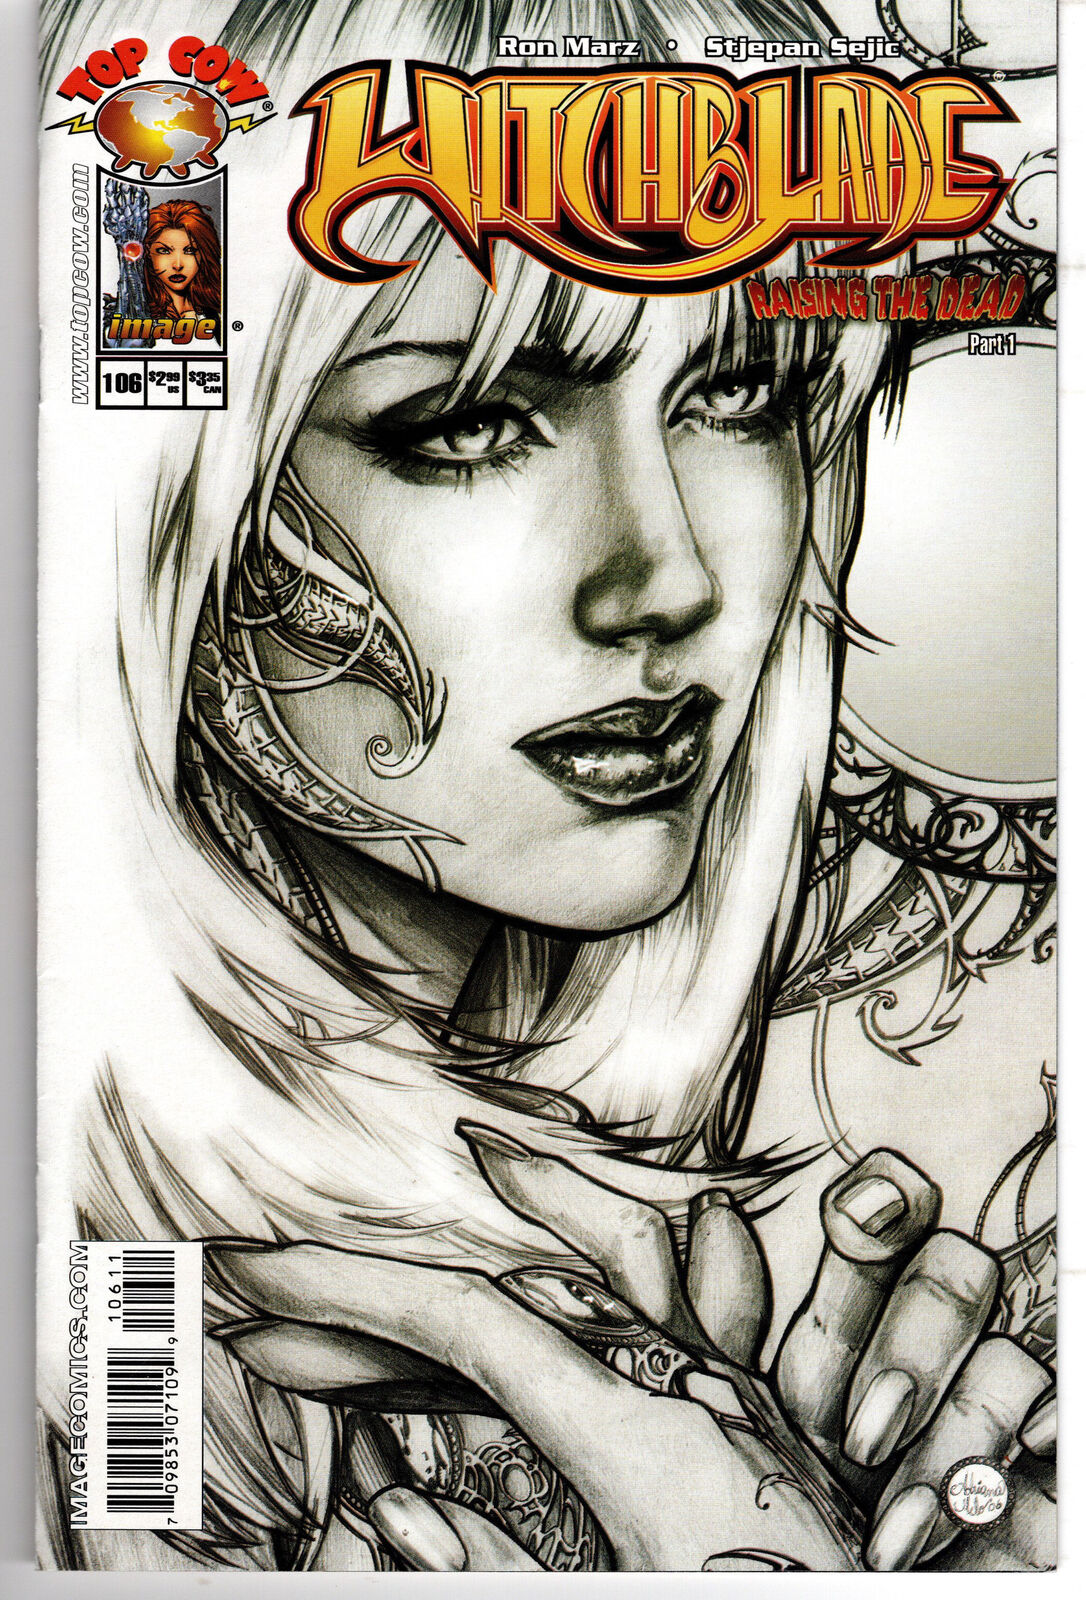 Witchblade #106 1995 Series NM+ Adriana Melo Cover Image Top Cow